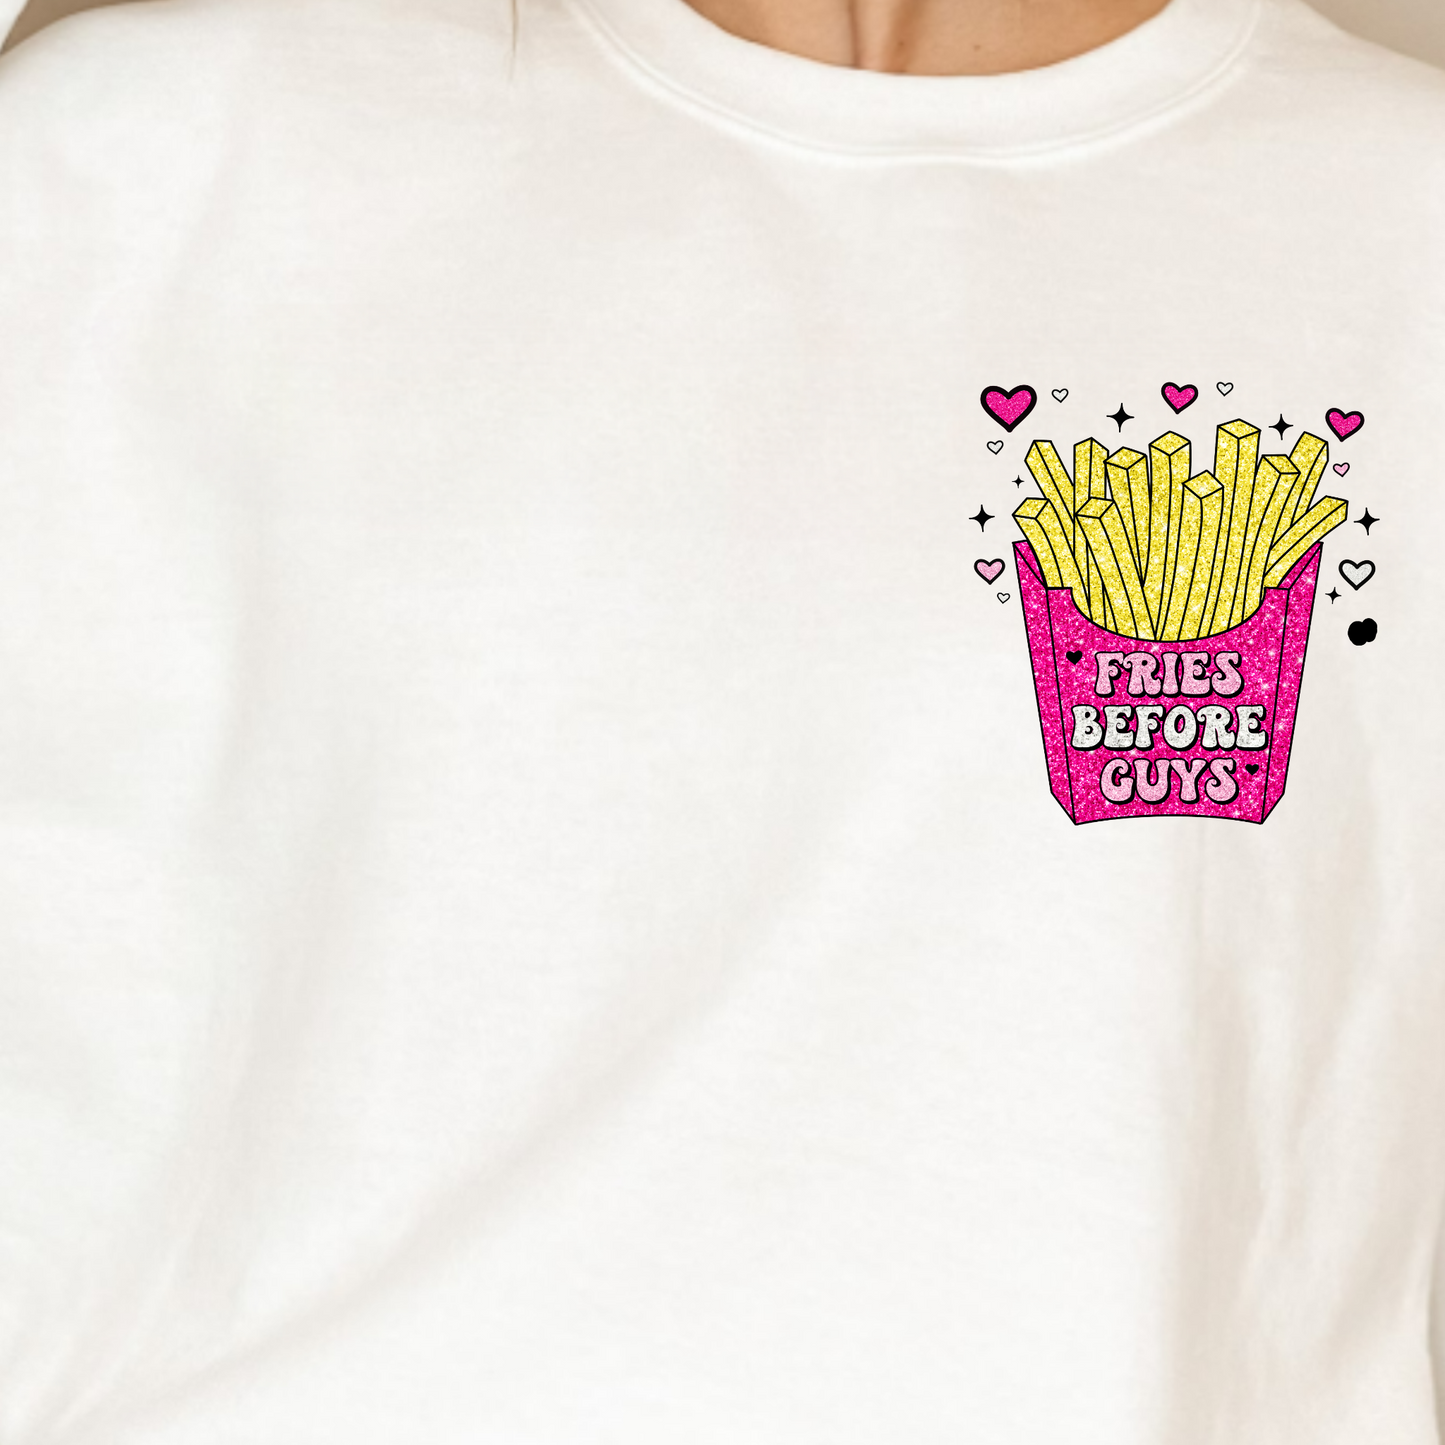 (Shirt not included) 7" Fries Before guys -  Matte Clear Film Transfer